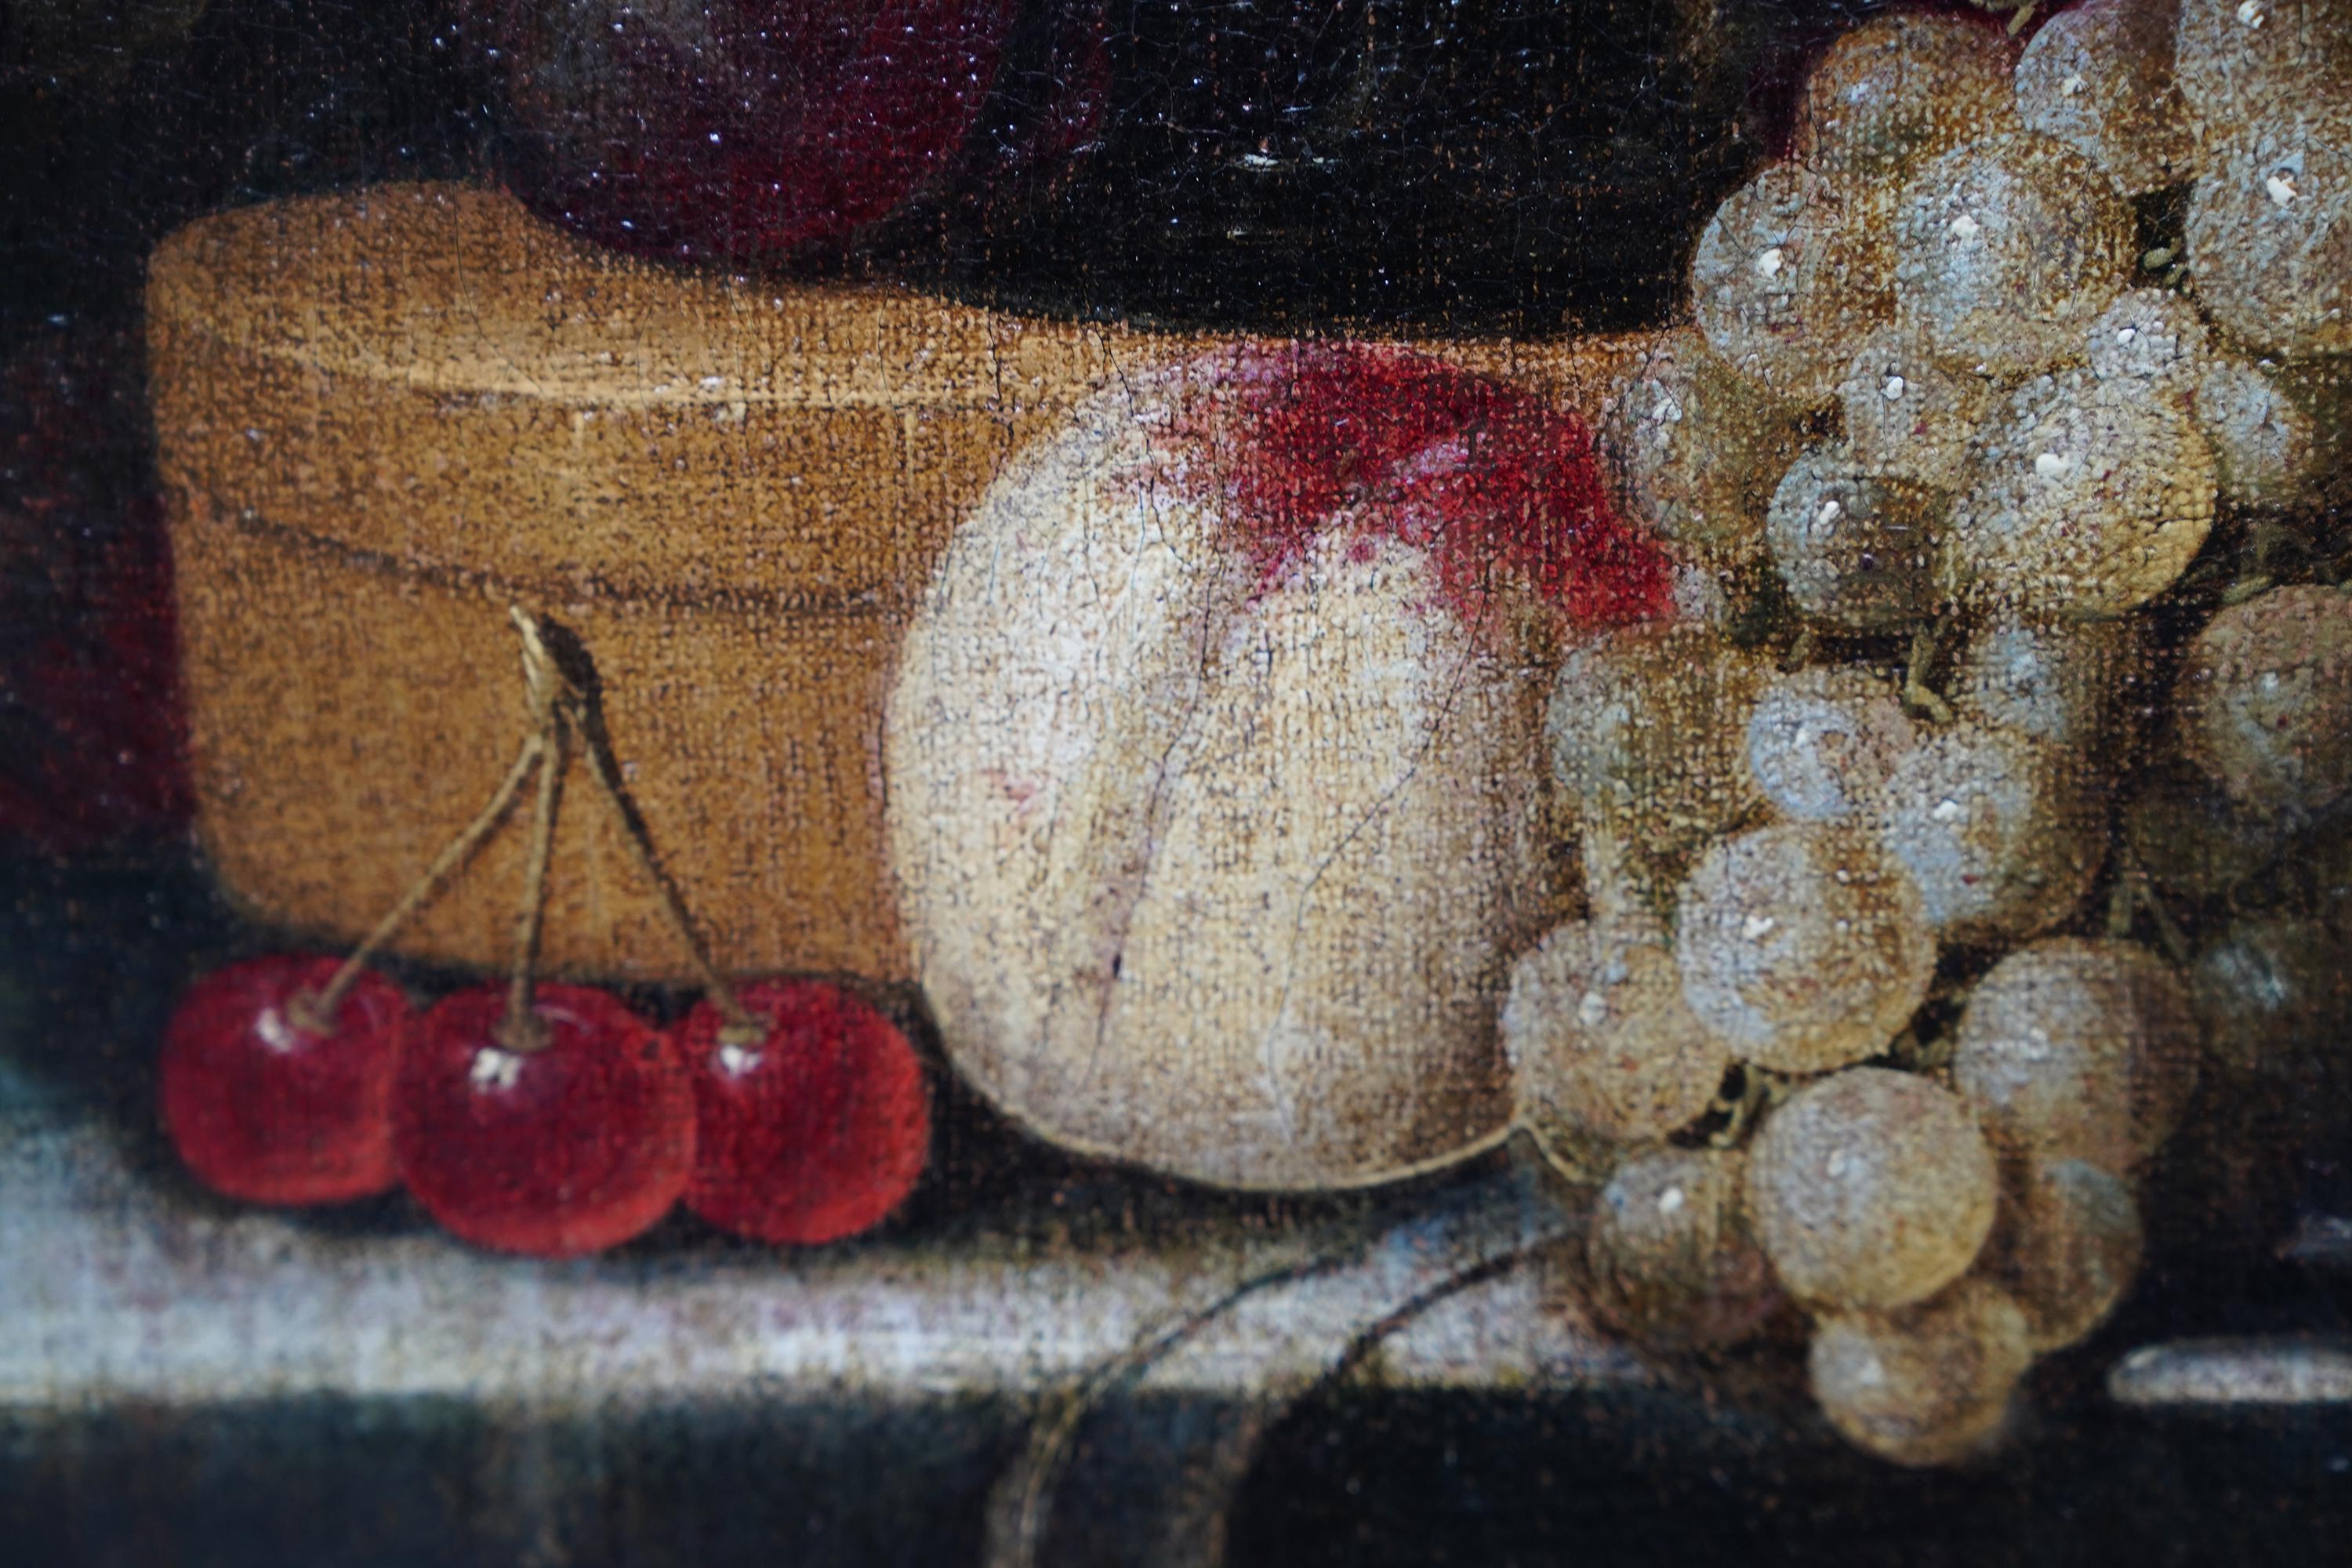 This stunning Dutch 17th century Old Master still life oil painting is attributed to the circle of Jan Davidsz de Heem. Painted circa 1660 it is a magnificent vibrant painting of grapes and peaches on a silver plate, a bowl of cherries, a glass